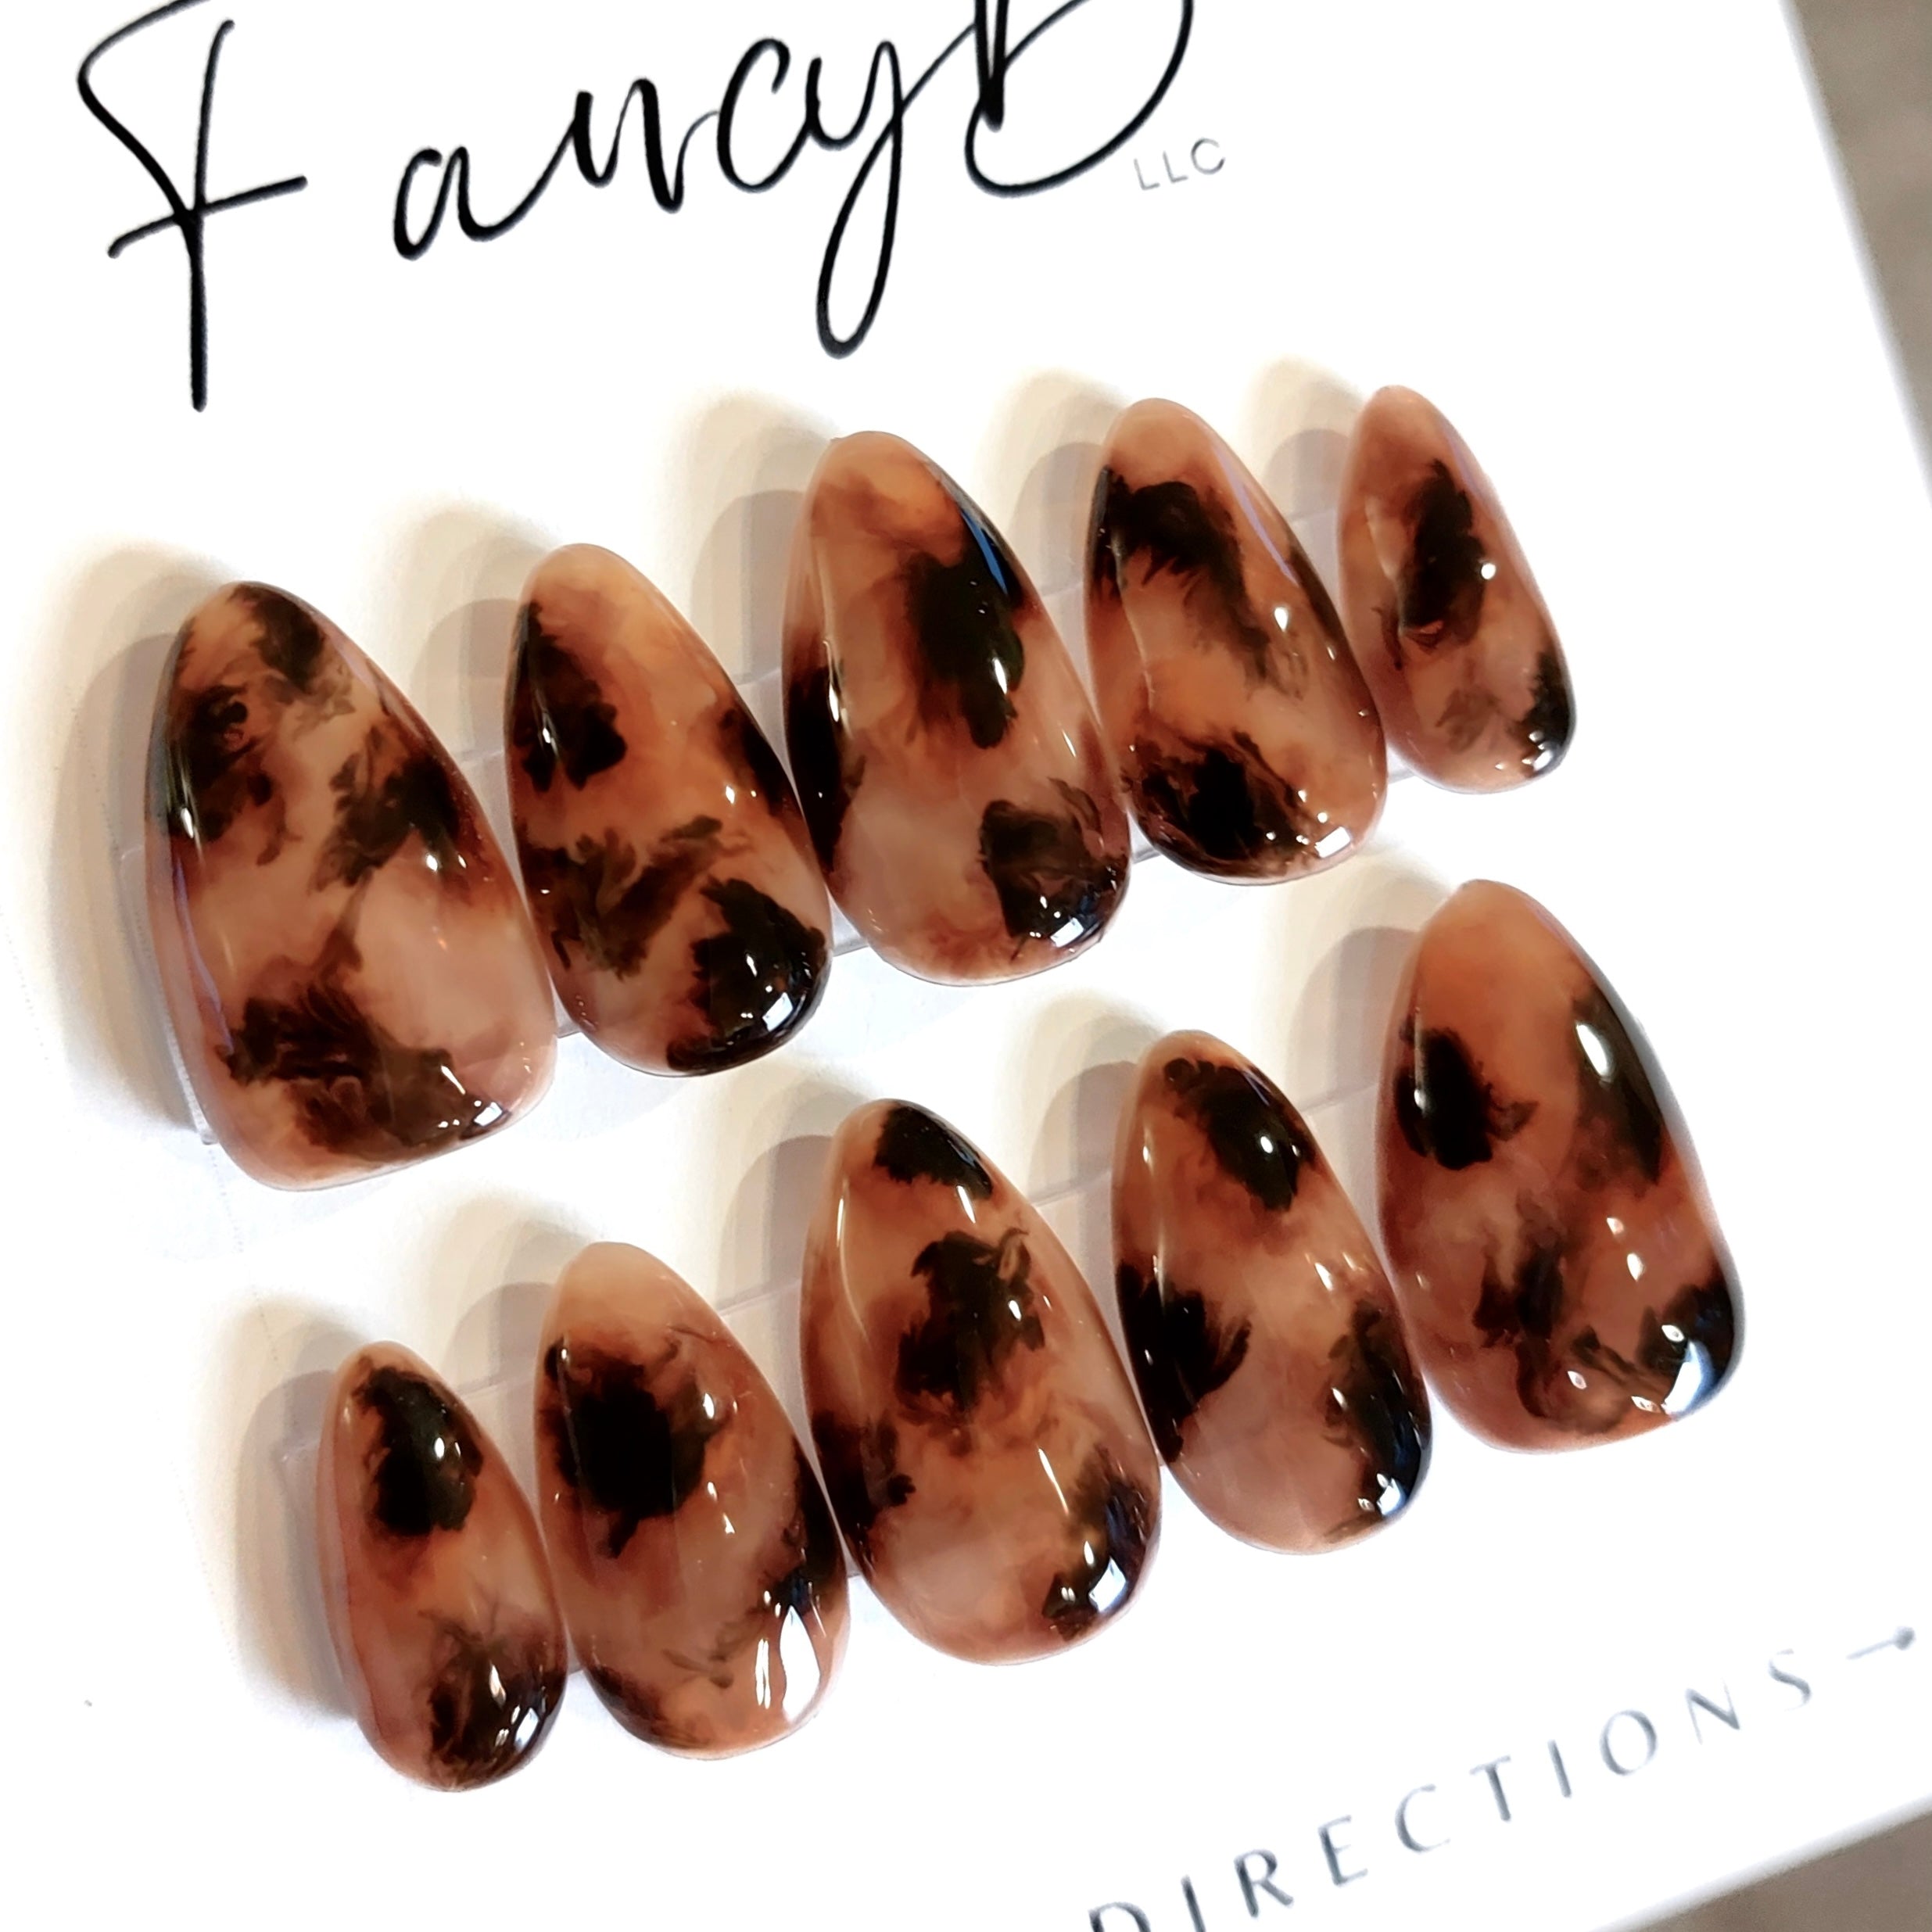 Custom press on nails in tortoiseshell design, medium brown color with deep brown and black spots in gloss finish with a short almond nail shape. FancyB Nails.